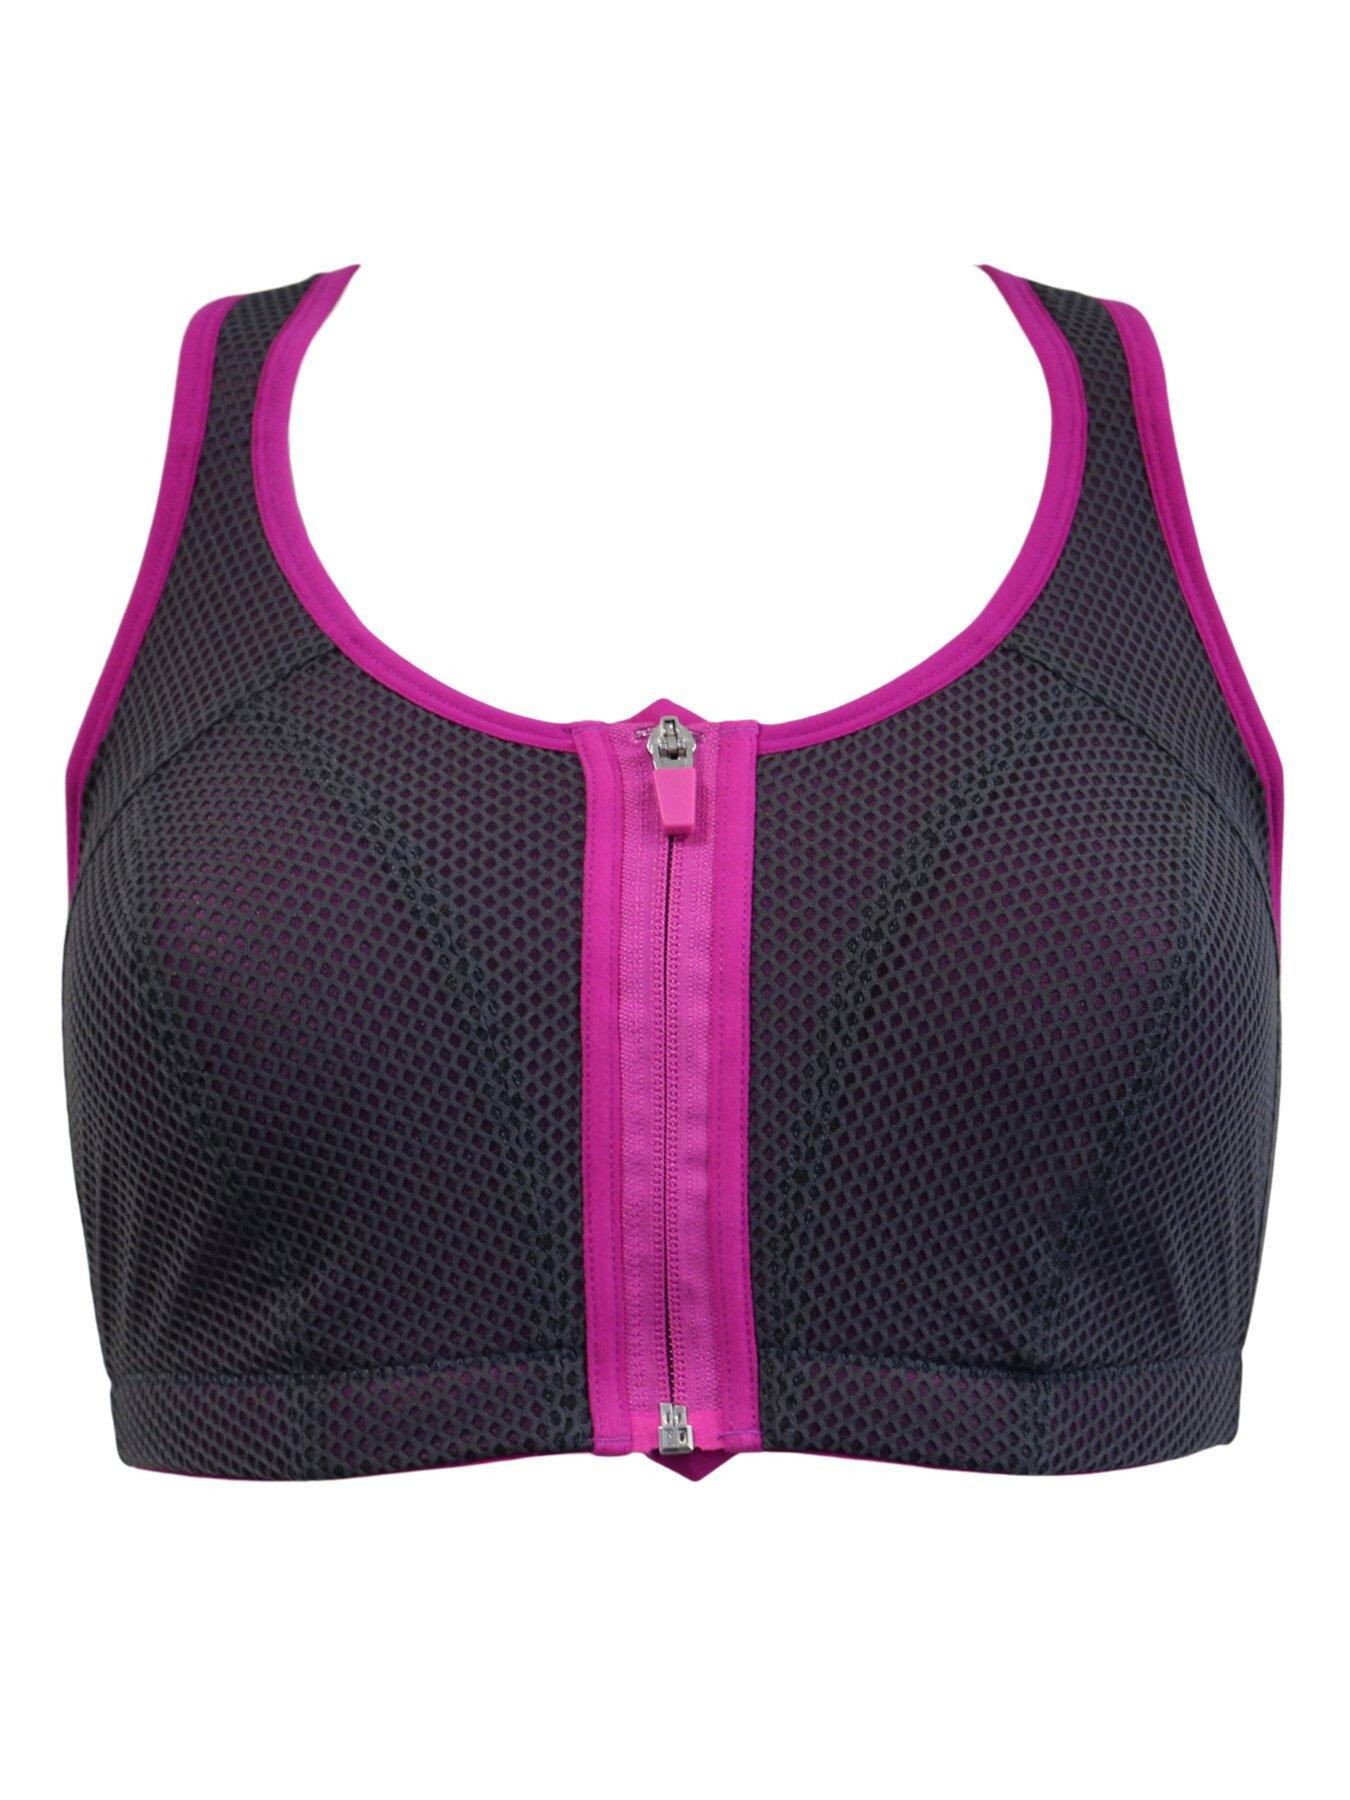 Pour Moi Energy Strive Non Wired Full Cup Sports Bra - Black/Multi